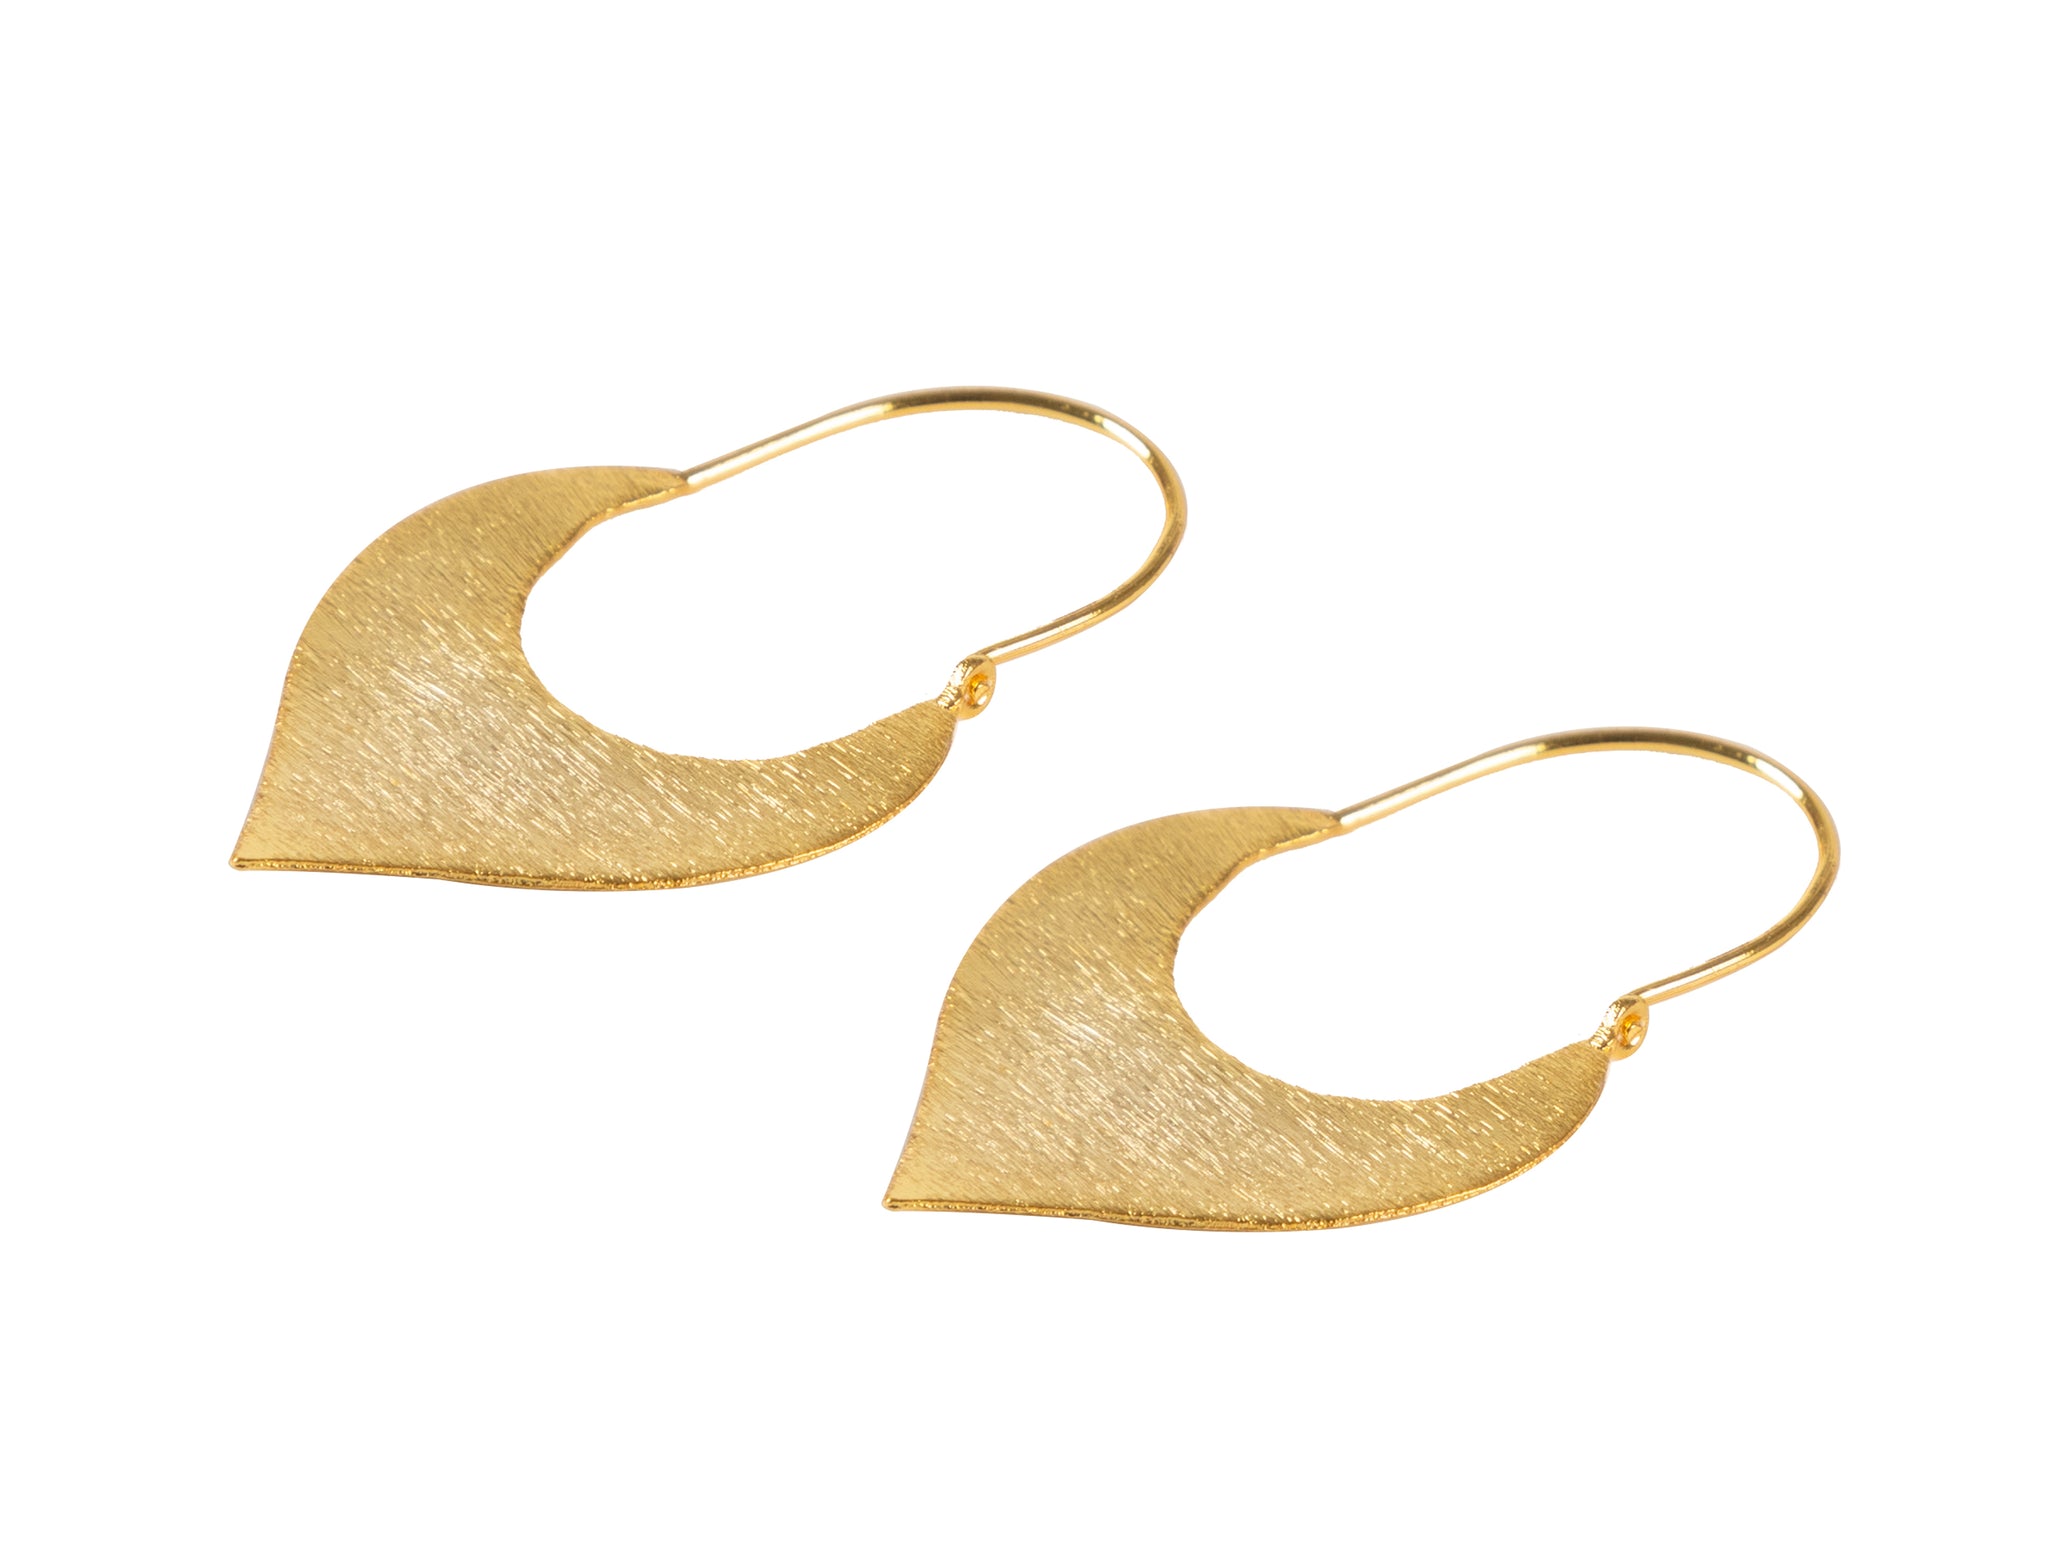 Textured Statement Earrings, Gold plated. Handmade